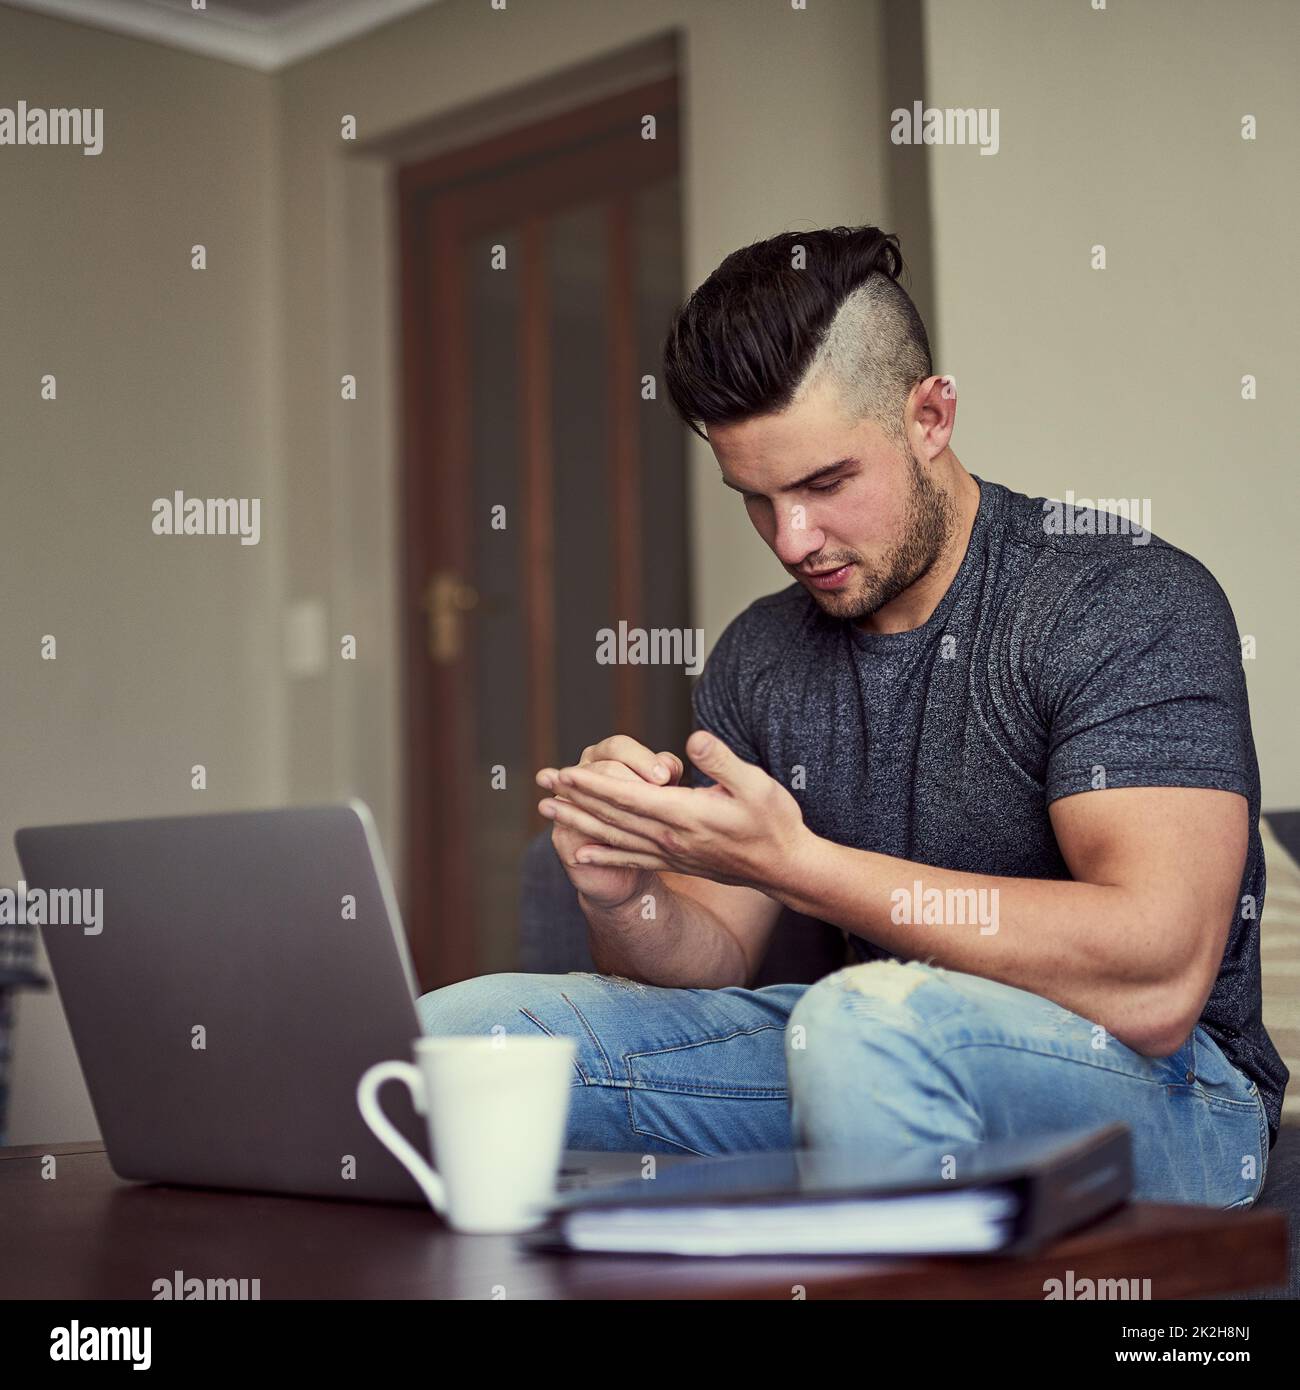 Memo remember to buy a notebook. Shot of a serious young man making notes on his hand while he works on his laptop at home. Stock Photo